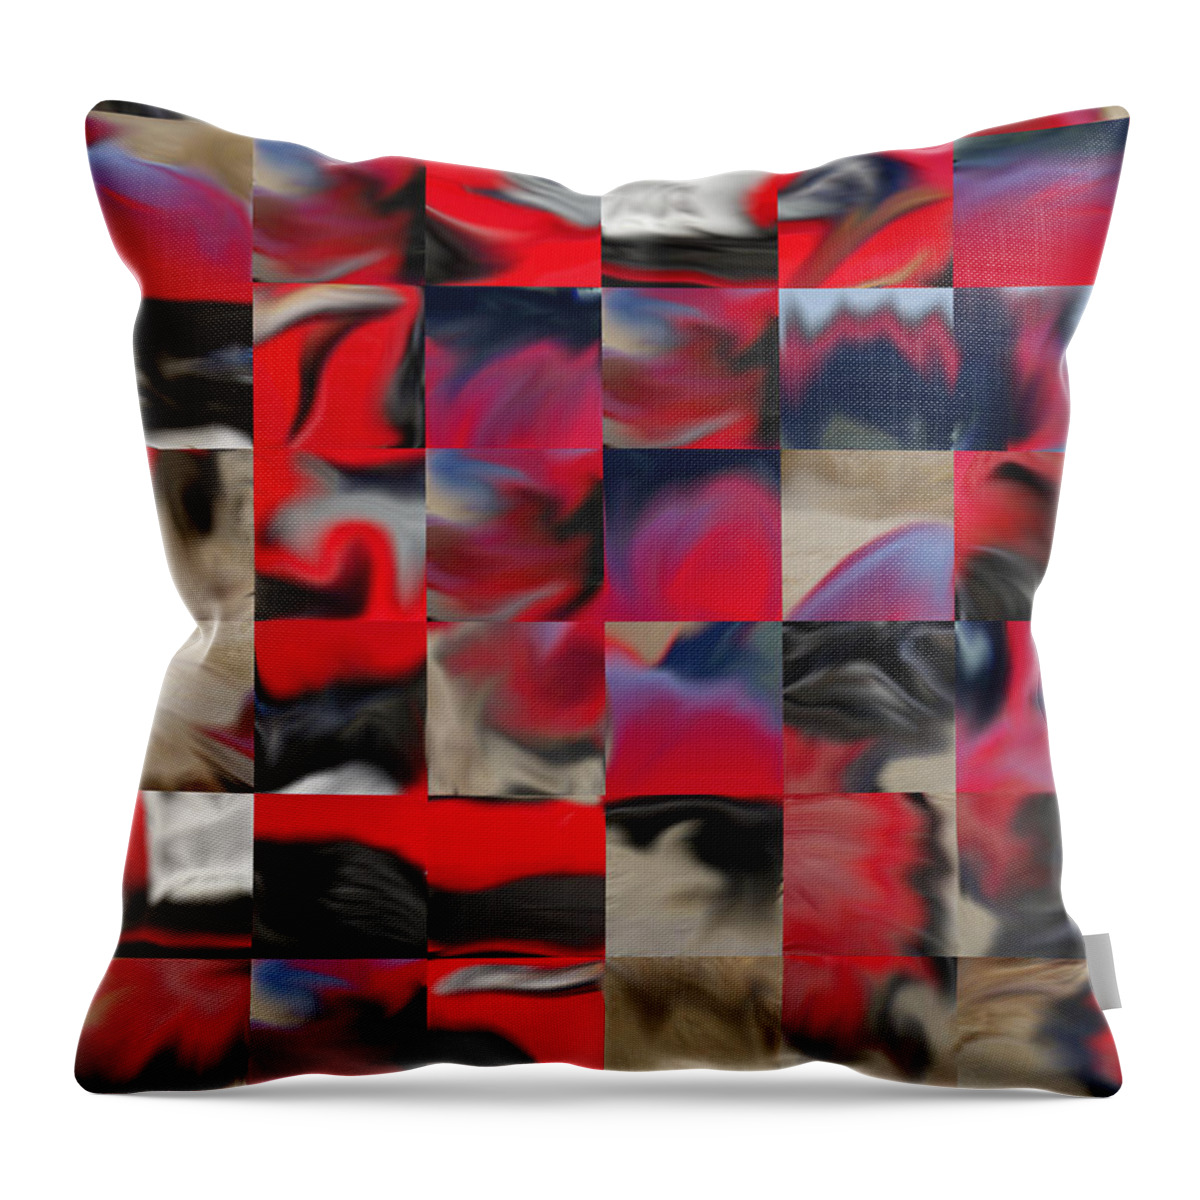 Richard Reeve Throw Pillow featuring the digital art Coupe Rouge by Richard Reeve